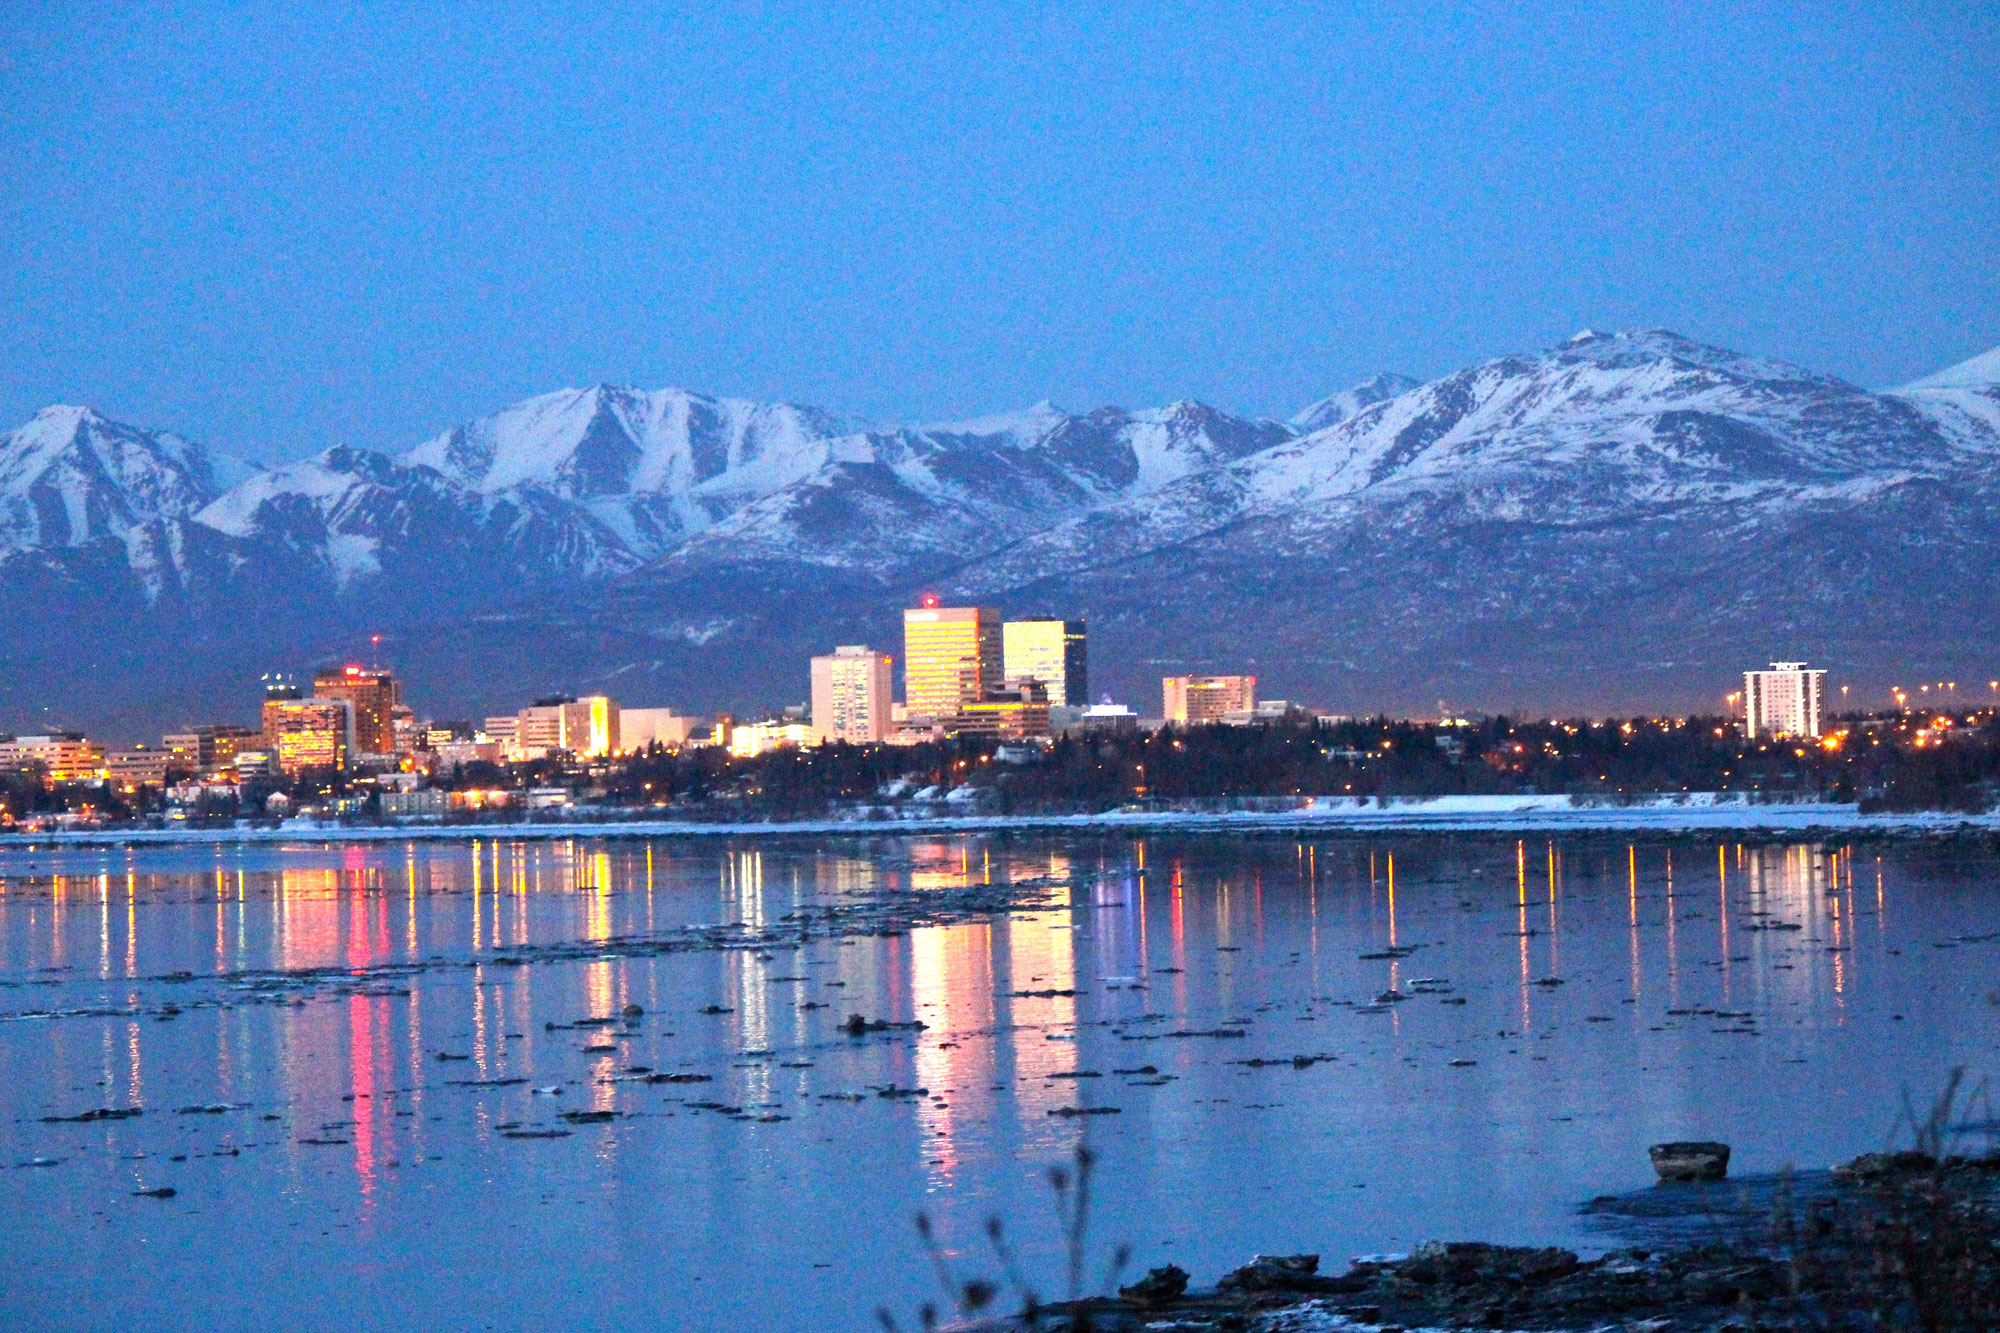 Photograph of Anchorage, Alaska, taken in 2016. The photo shows a city along a coast with snow-capped mountains rising in the background. The photo was taken in semi-darkness and the city is illuminated by lights.